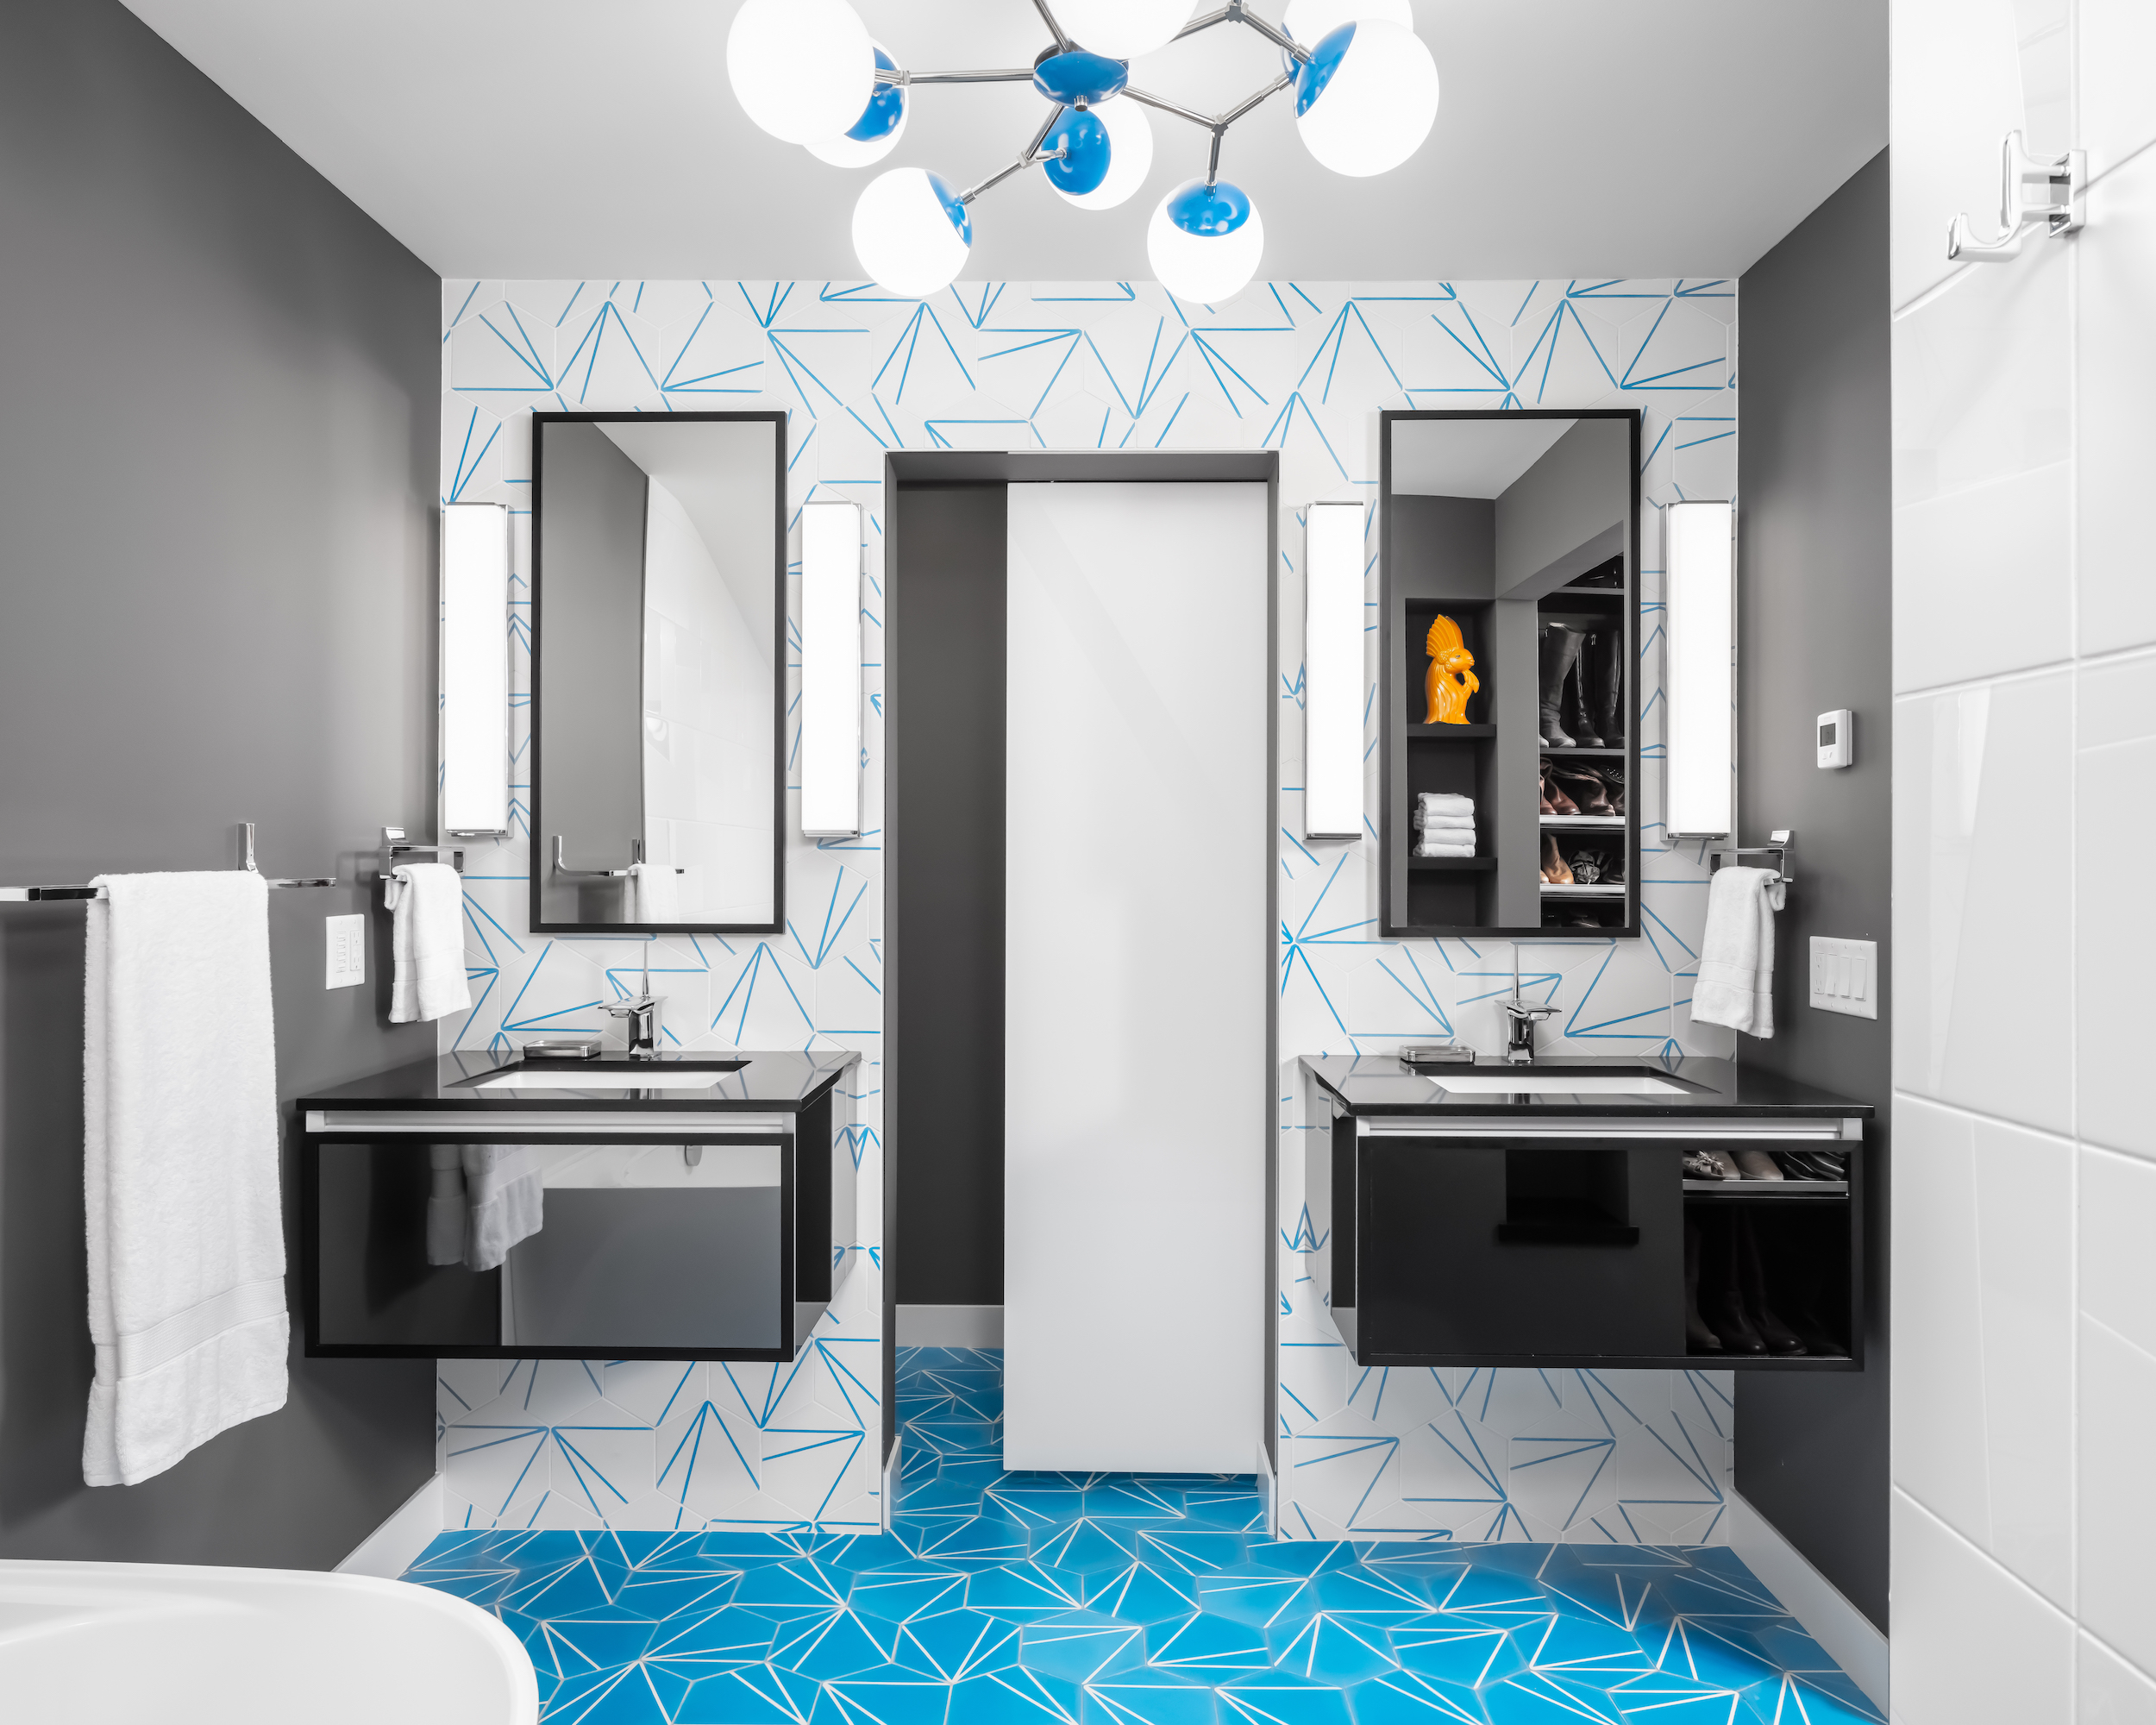 Mid-Century Moxie: A Master Bath Makeover. Modern bathroom remodel with cerulean blue floor tiles and geometric shower floor.  Features soaking tub, polished chrome fixtures, and retro atomic-age light fixtures.